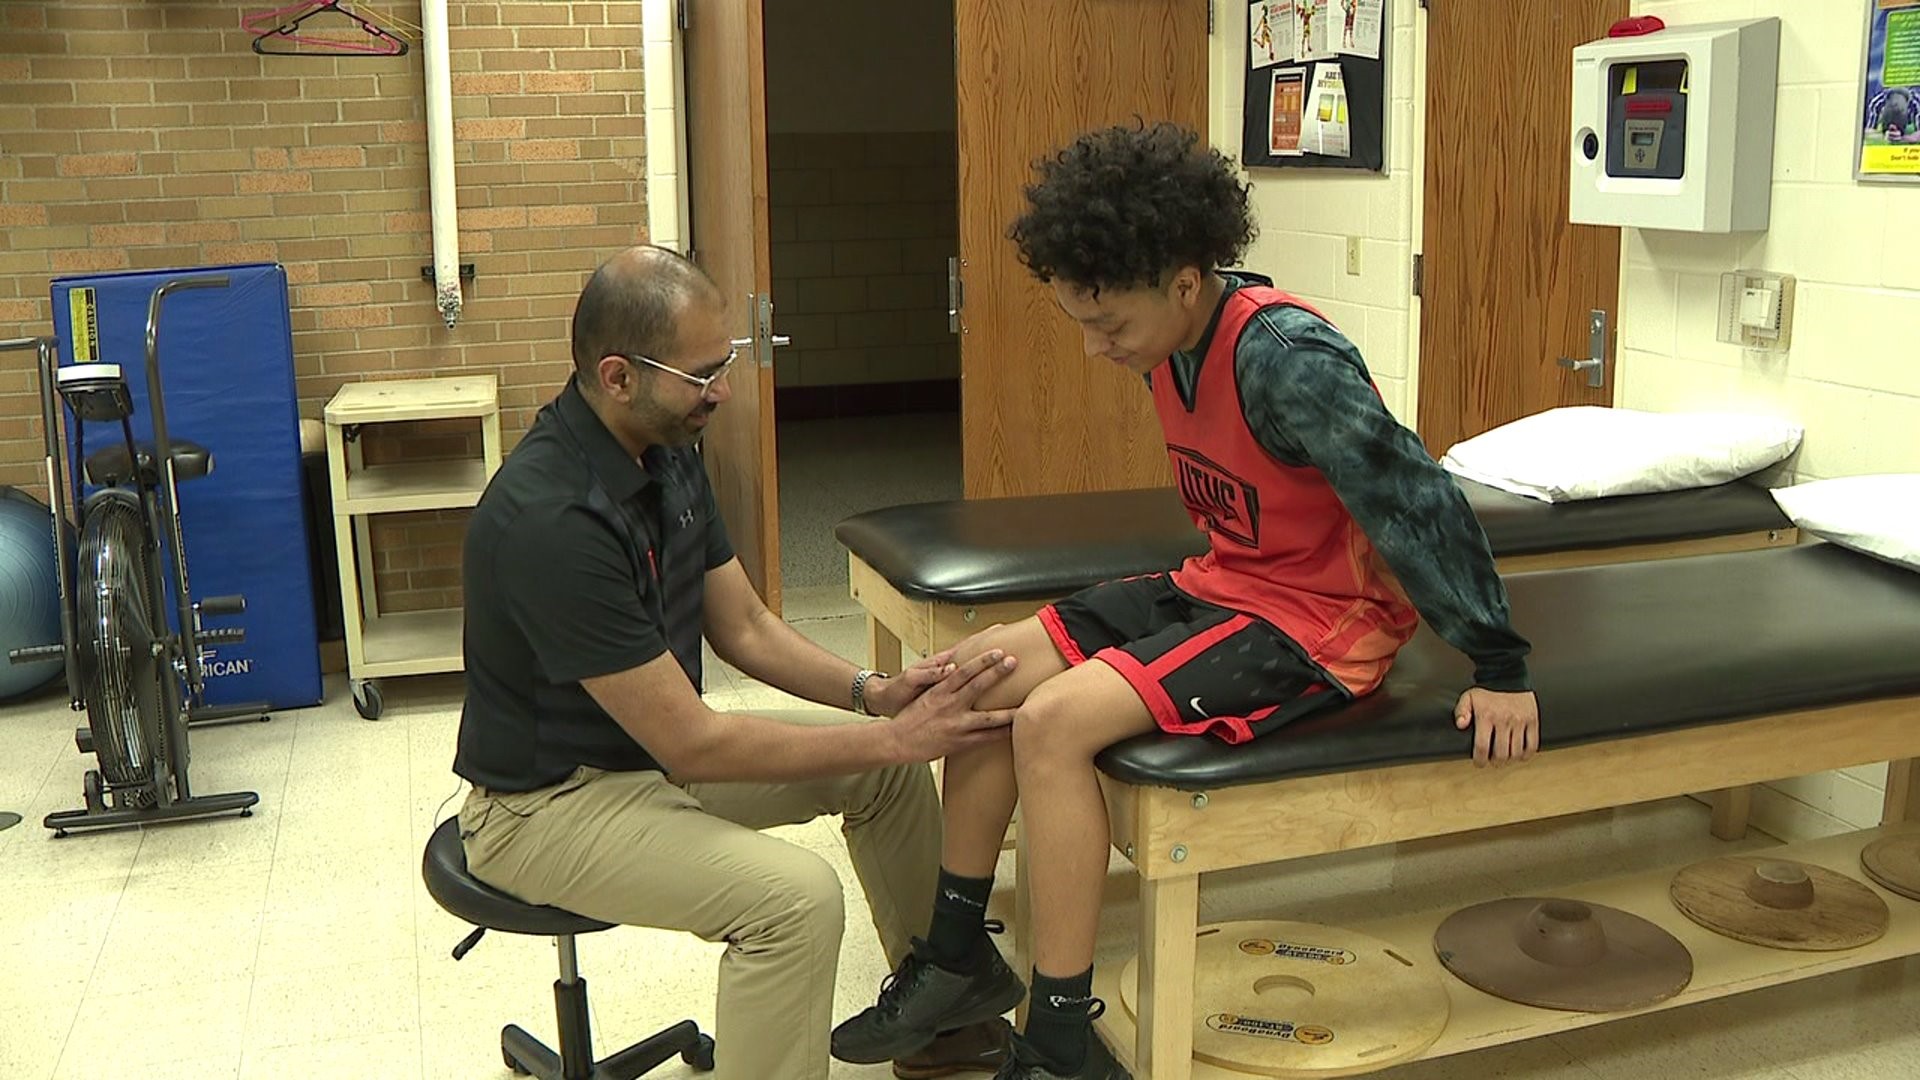 Knee surgery gets U.T. basketball player back in the game